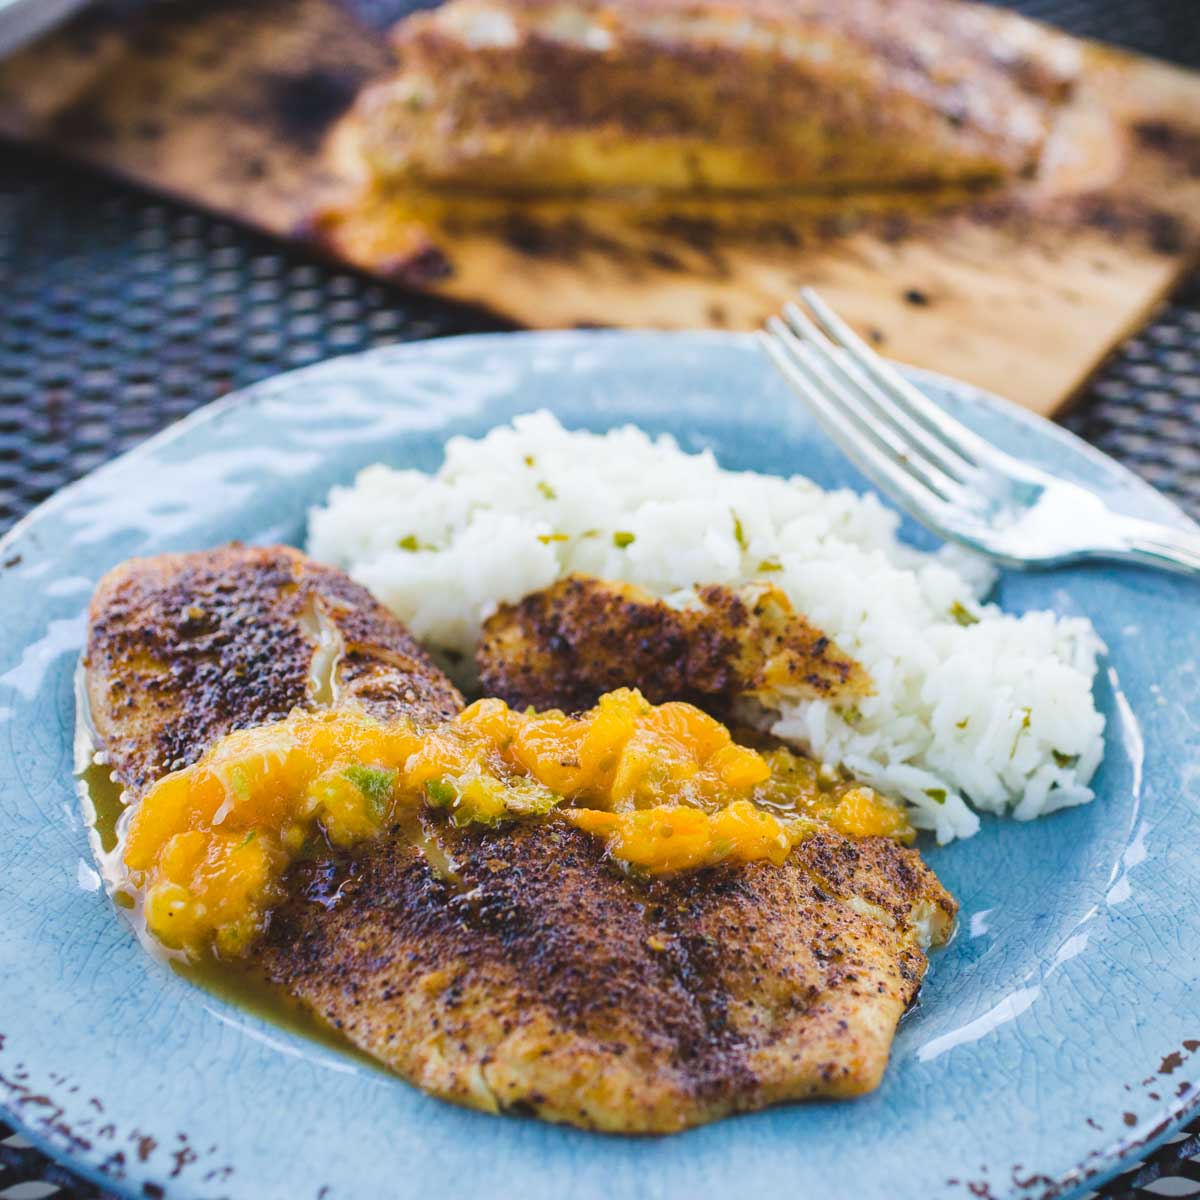 Yellow mojito salsa is drizzled over a spicy grilled tilapia on a blue plate next to a serving of white rice.